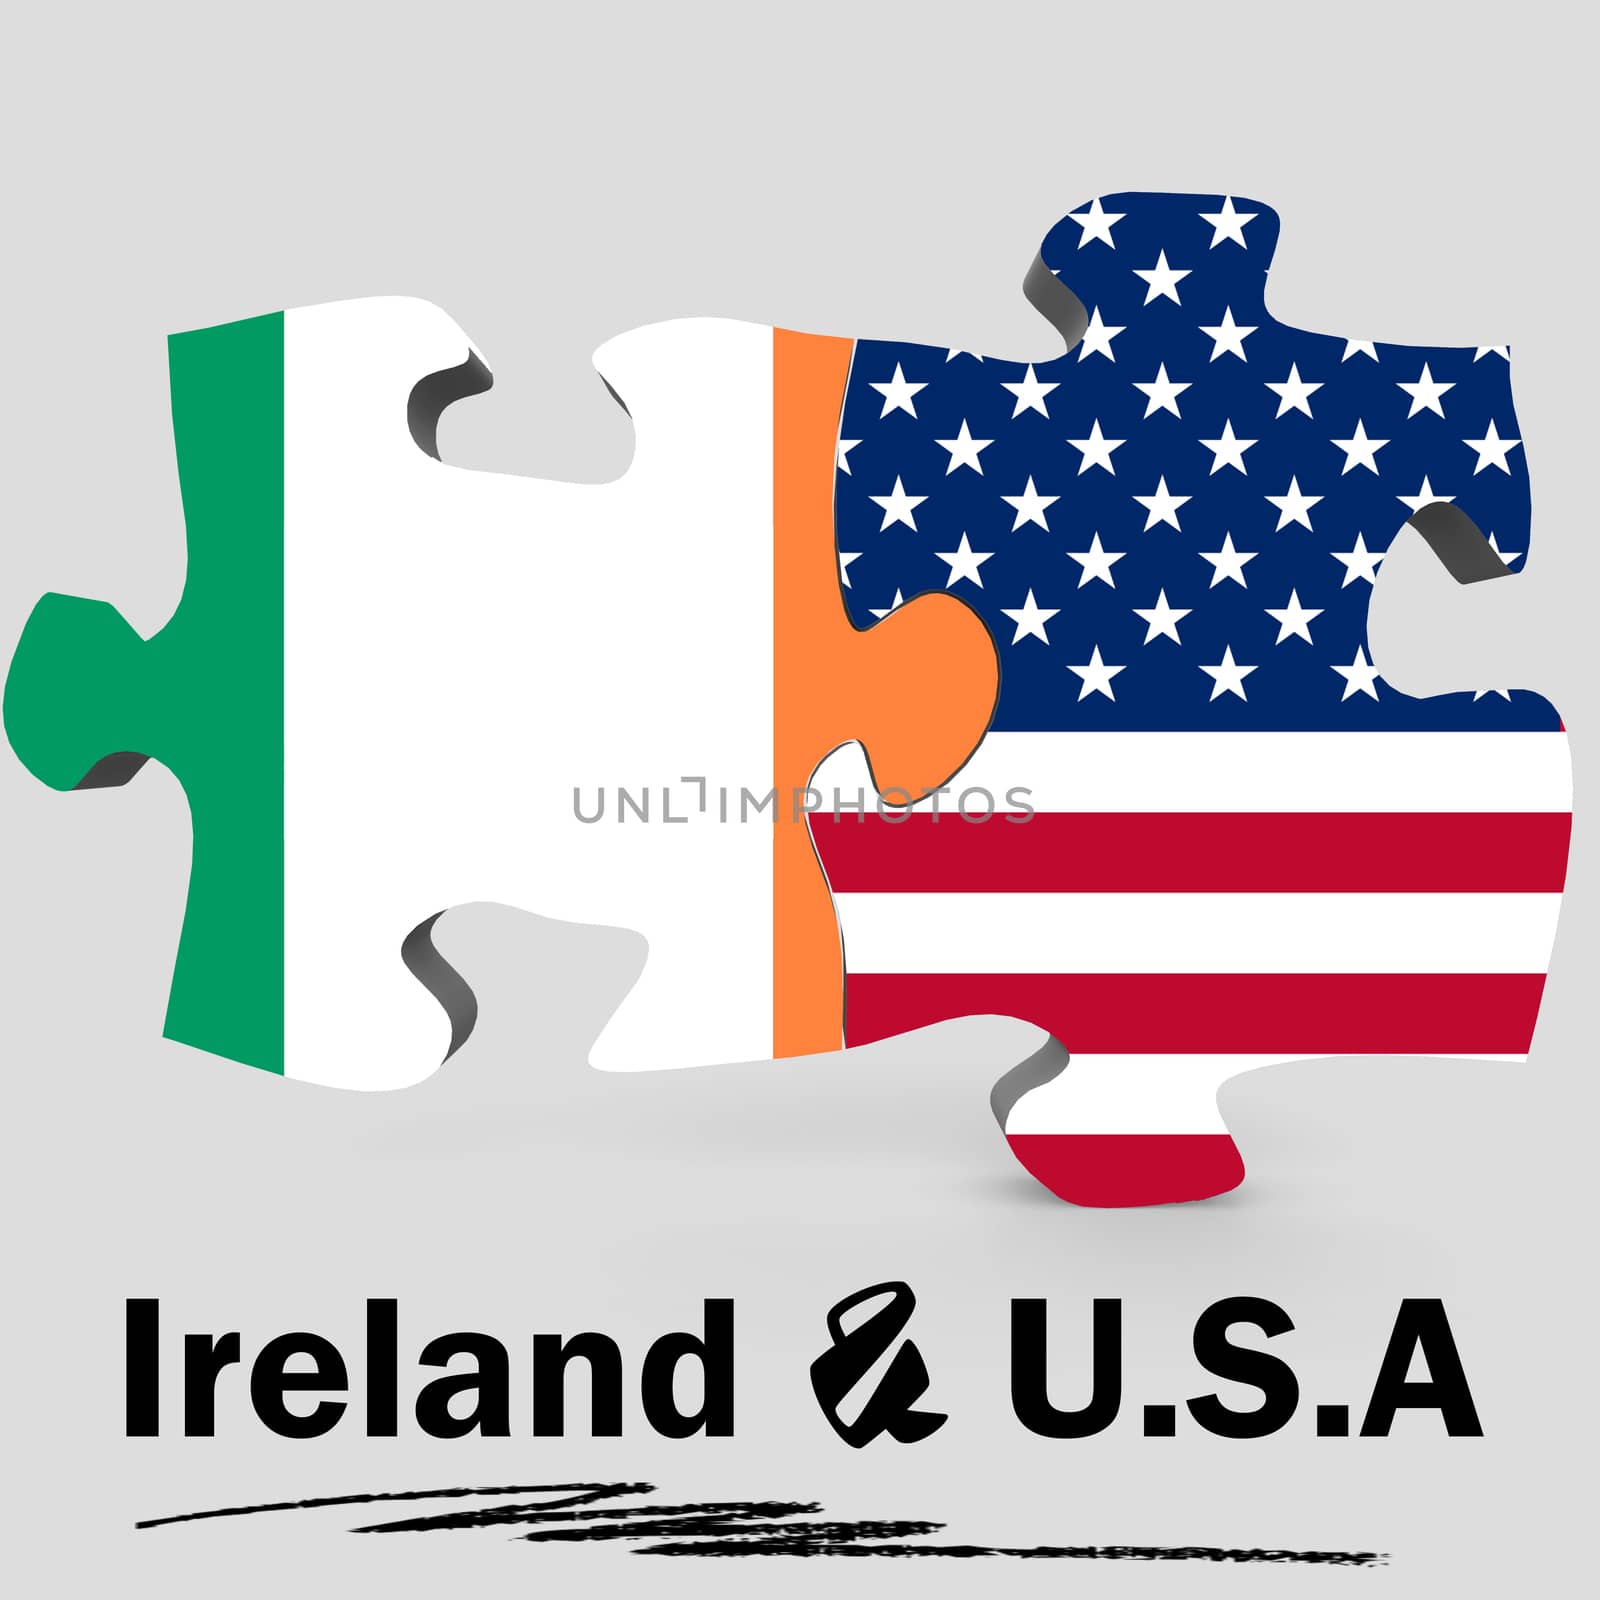 USA and Ireland flags in puzzle by tang90246